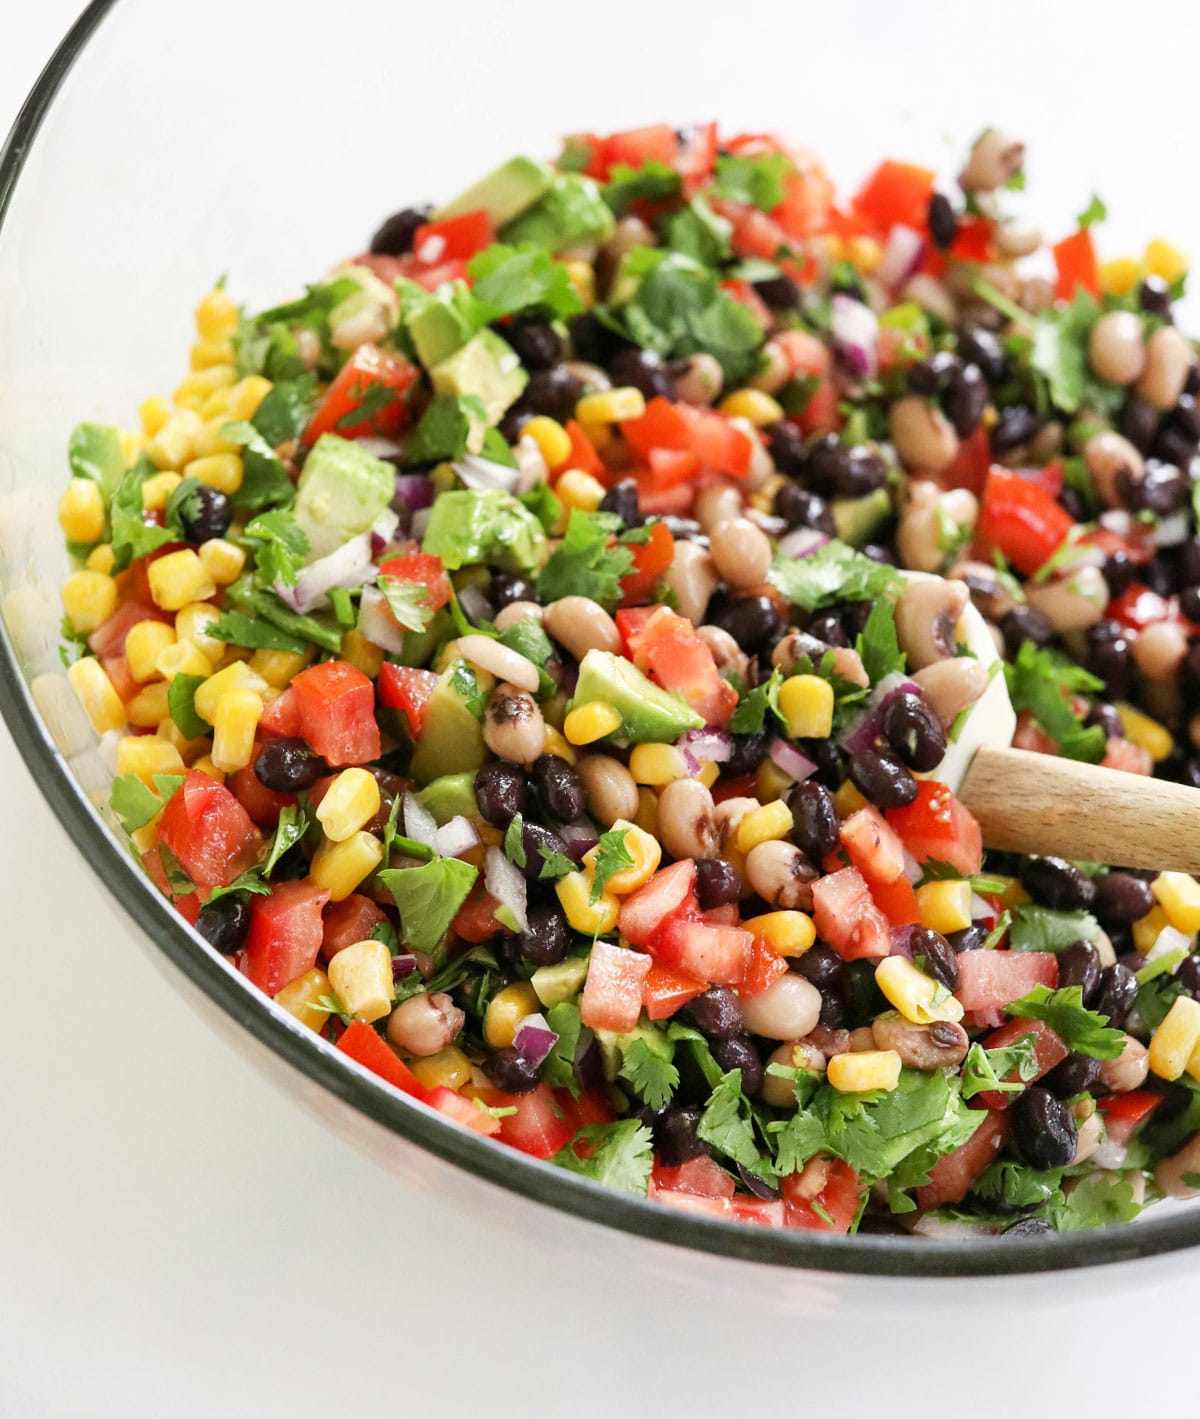 chopped veggies and beans in glass bowl